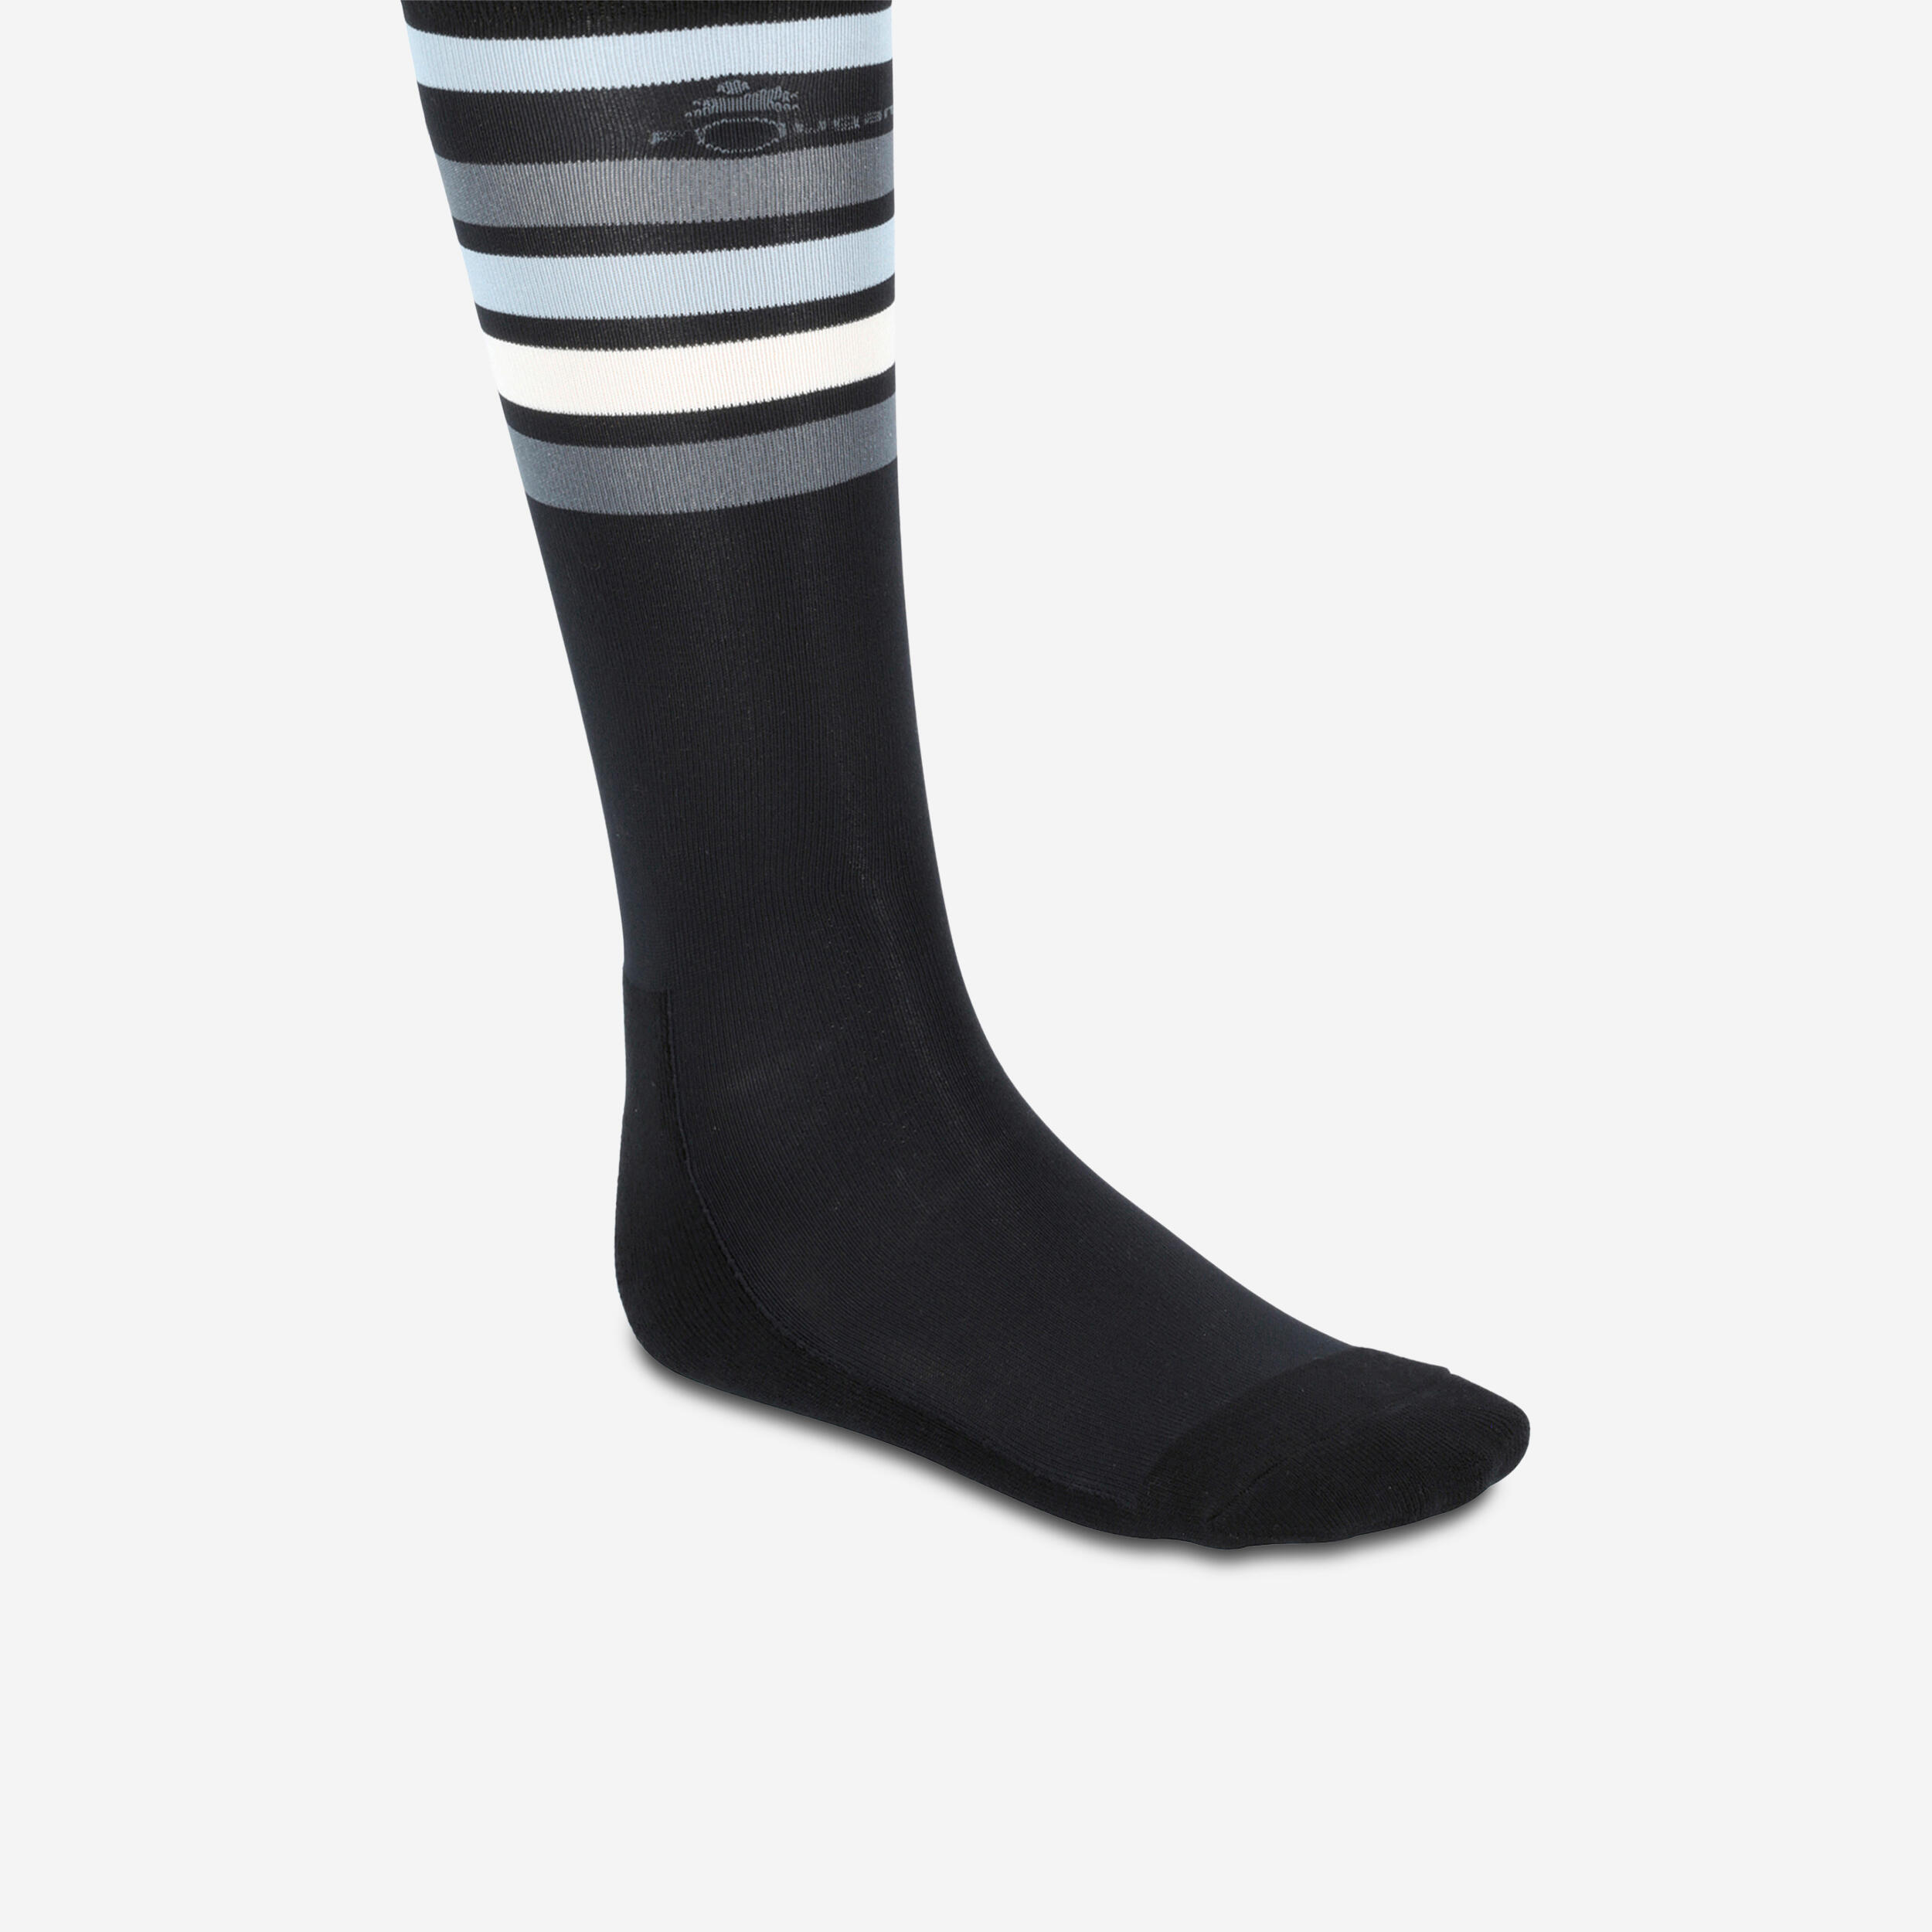 Adult Horse Riding Socks SKS100 - Black/White and Grey Stripes By FOUGANZA | Decathlon